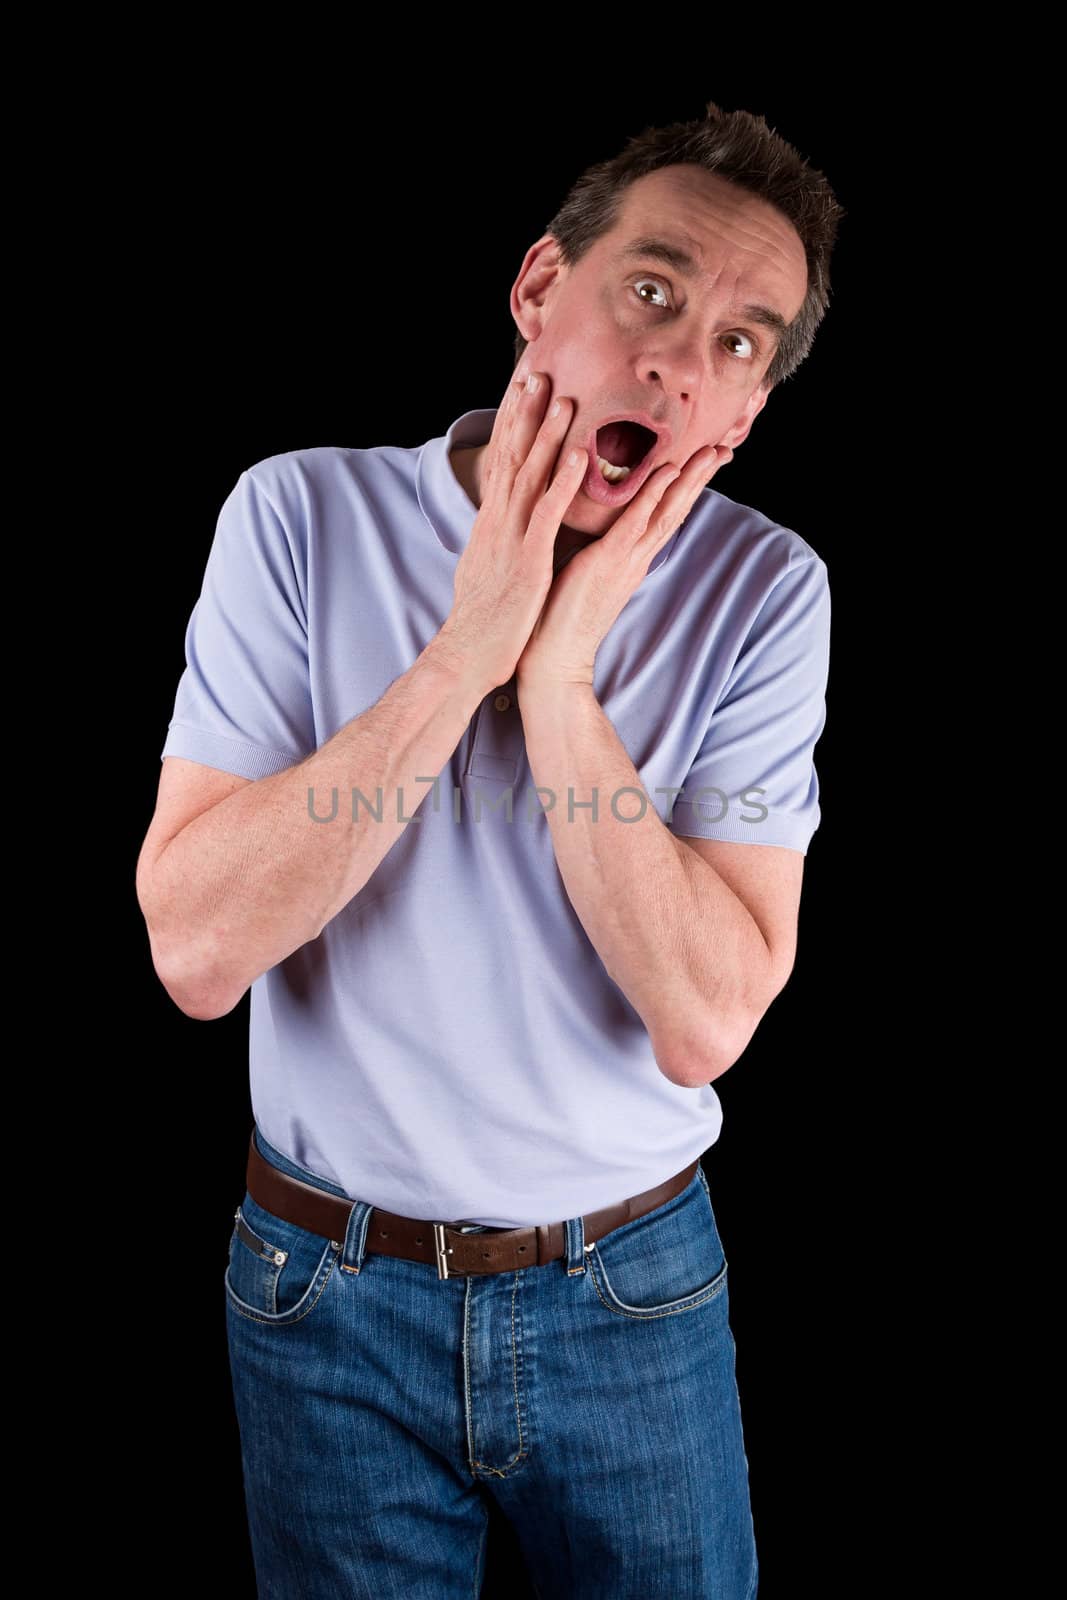 Middle Age Man Screaming in Horror Hands to Face Black Background